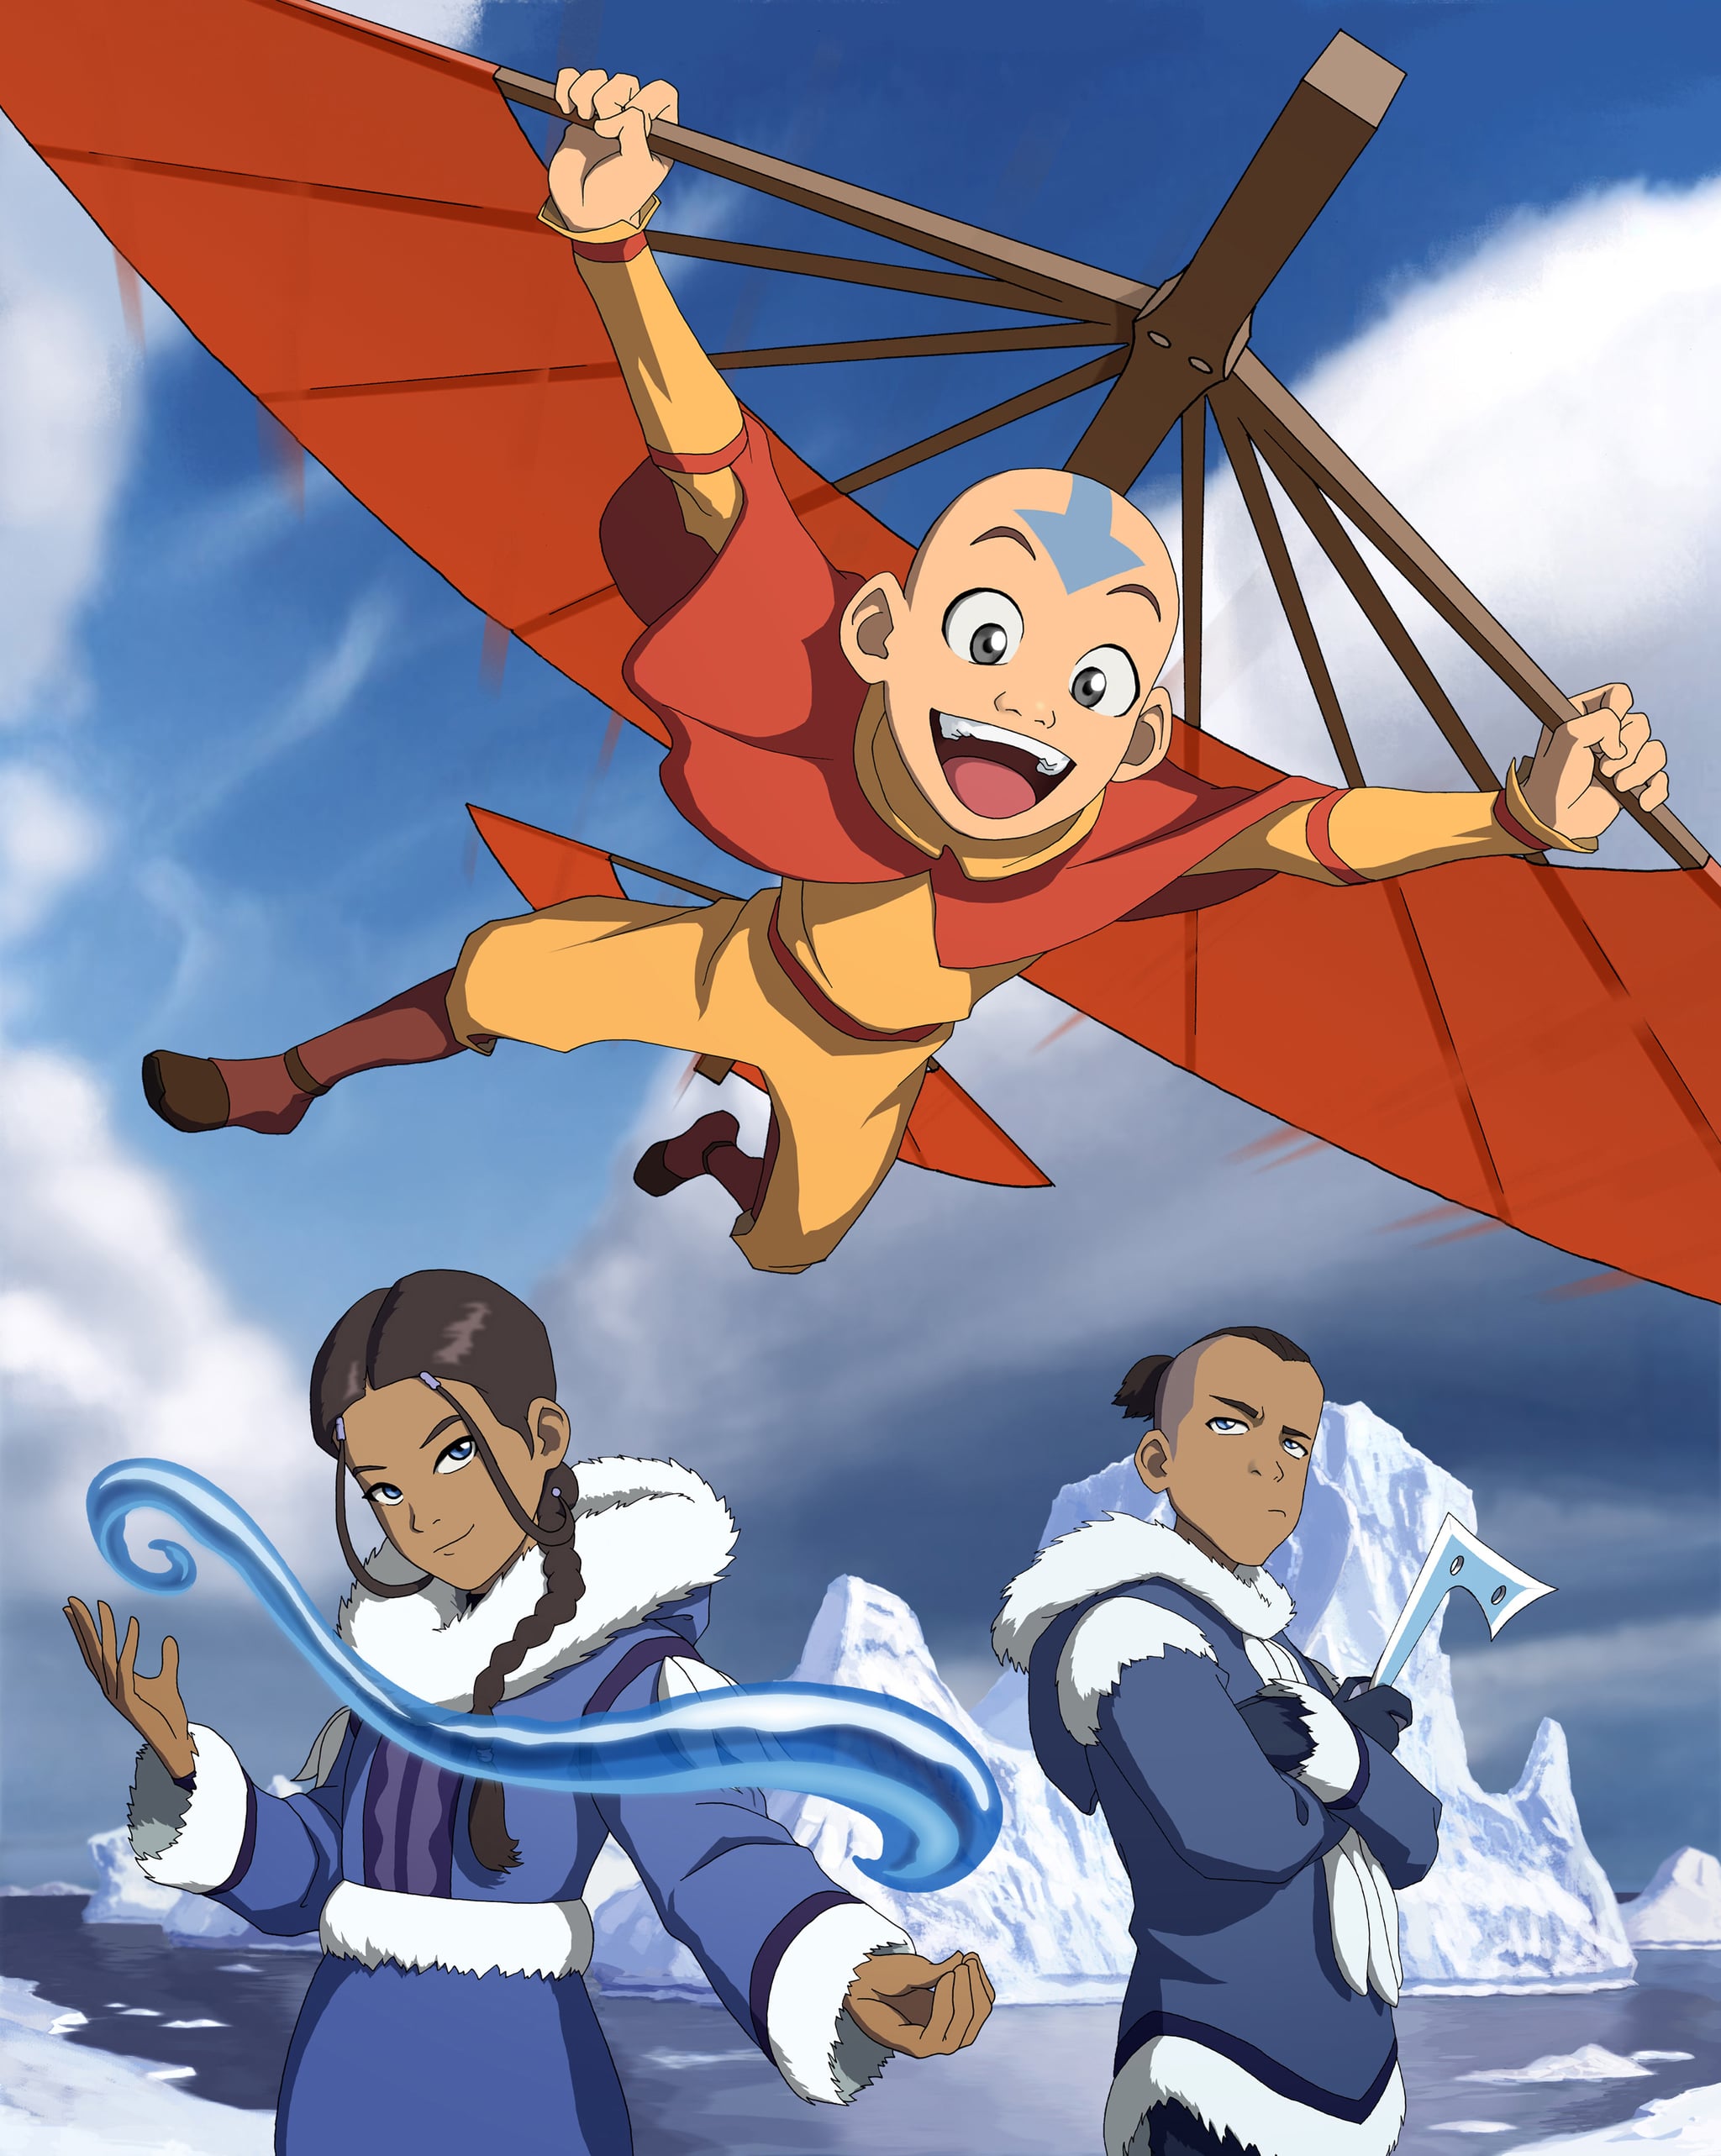 Avatar Generations  Official Gameplay Trailer   Coming Soon  Avatar  The Last Airbender from avatar the last airbender games nickelodeon Watch  Video  HiFiMovco